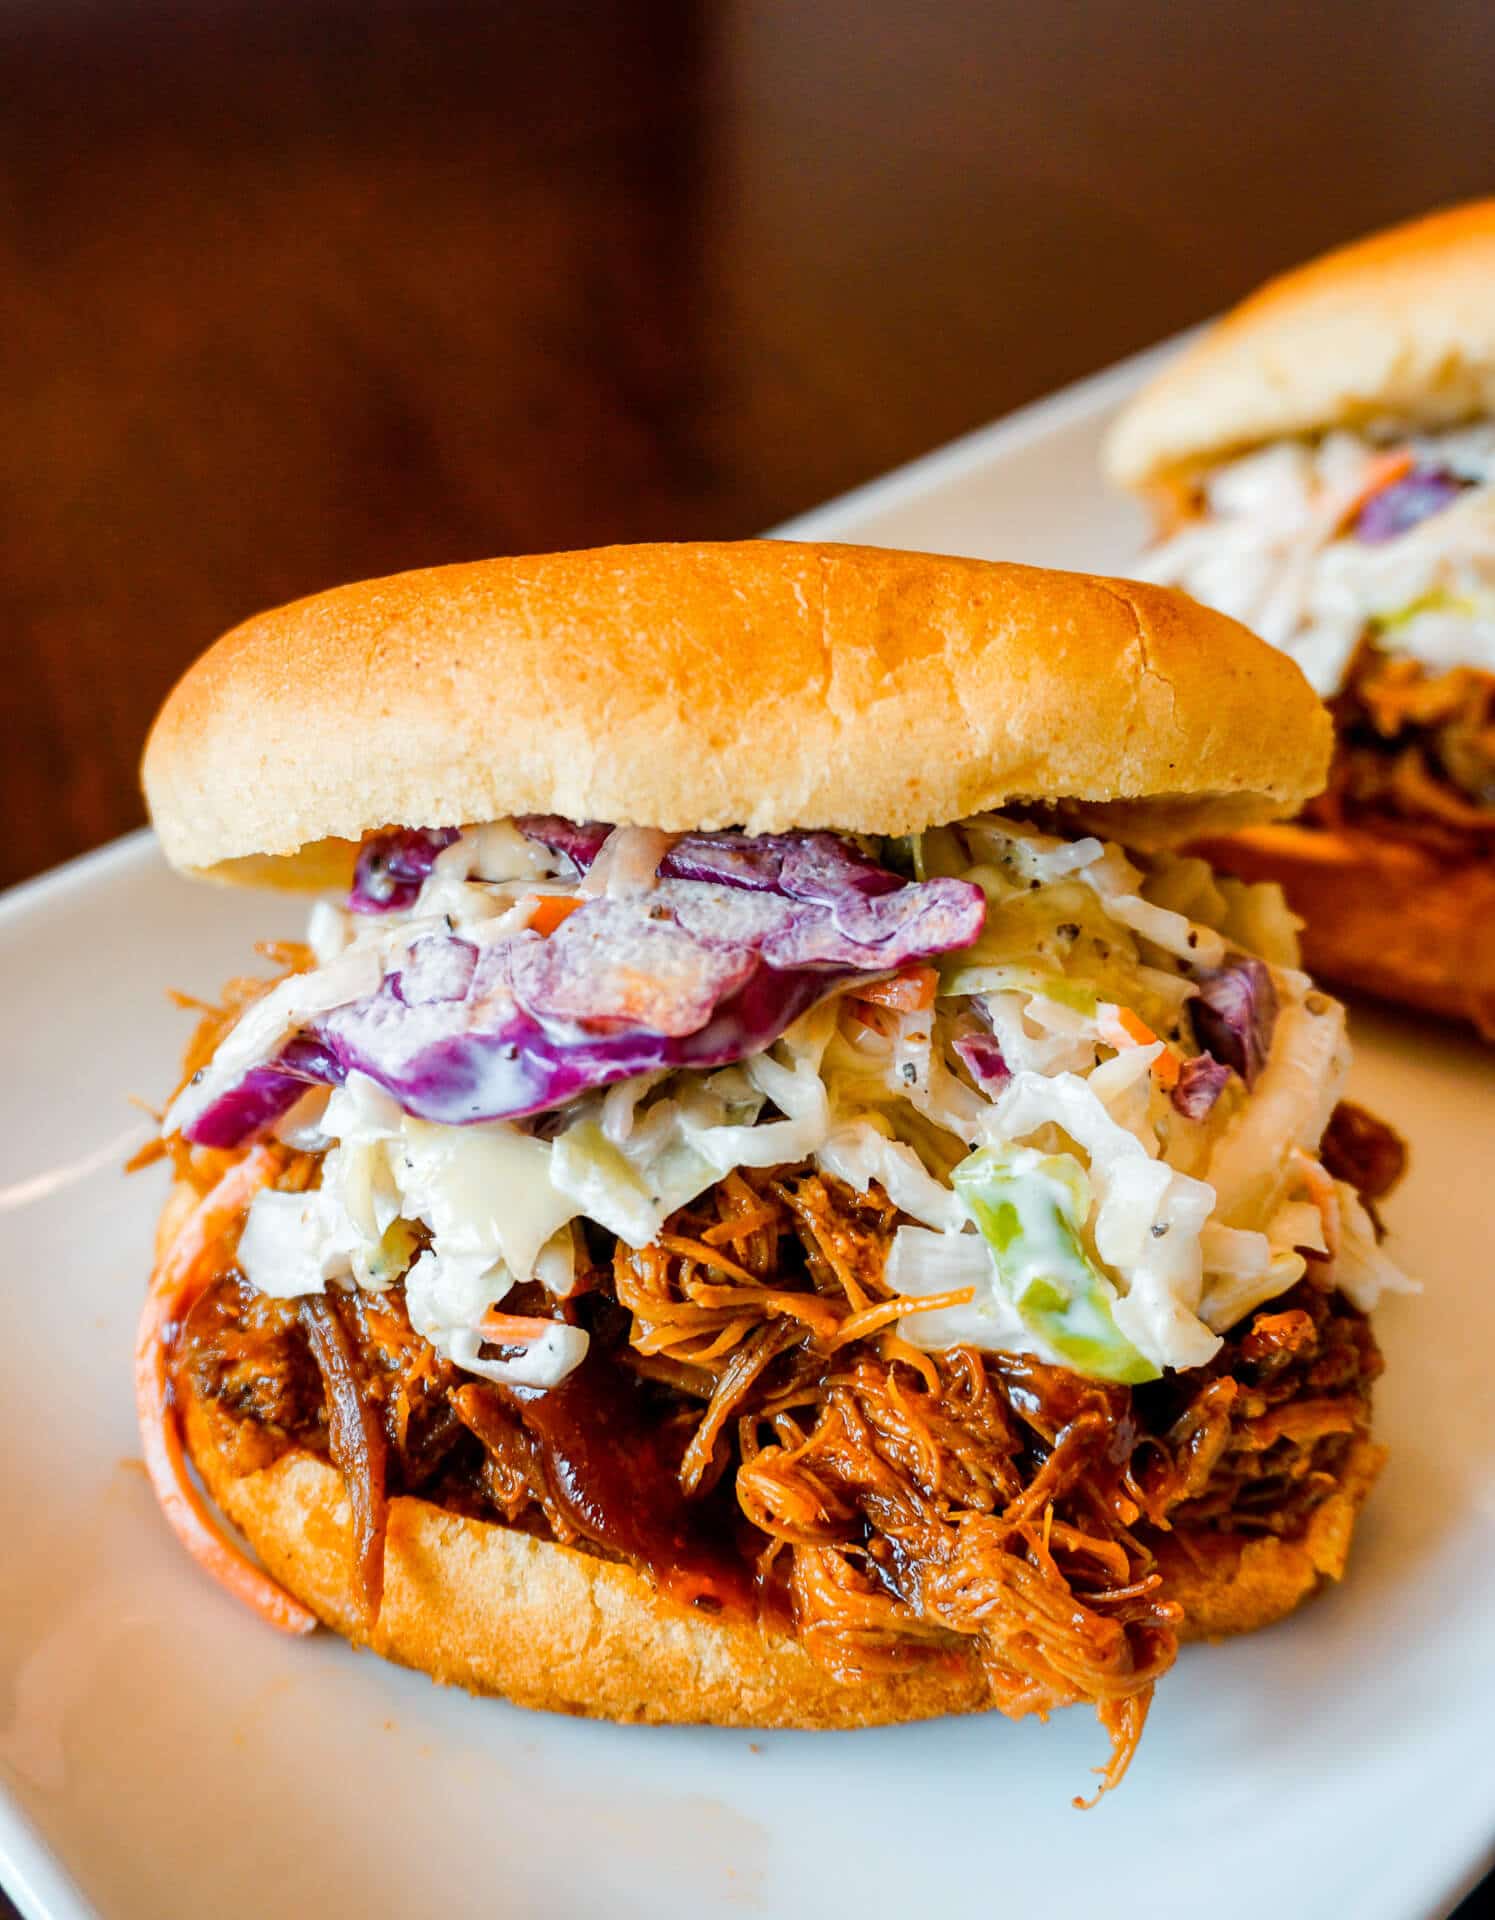 https://www.oursweetadventures.com/wp-content/uploads/2020/09/Texas-Pulled-Pork-4.jpg